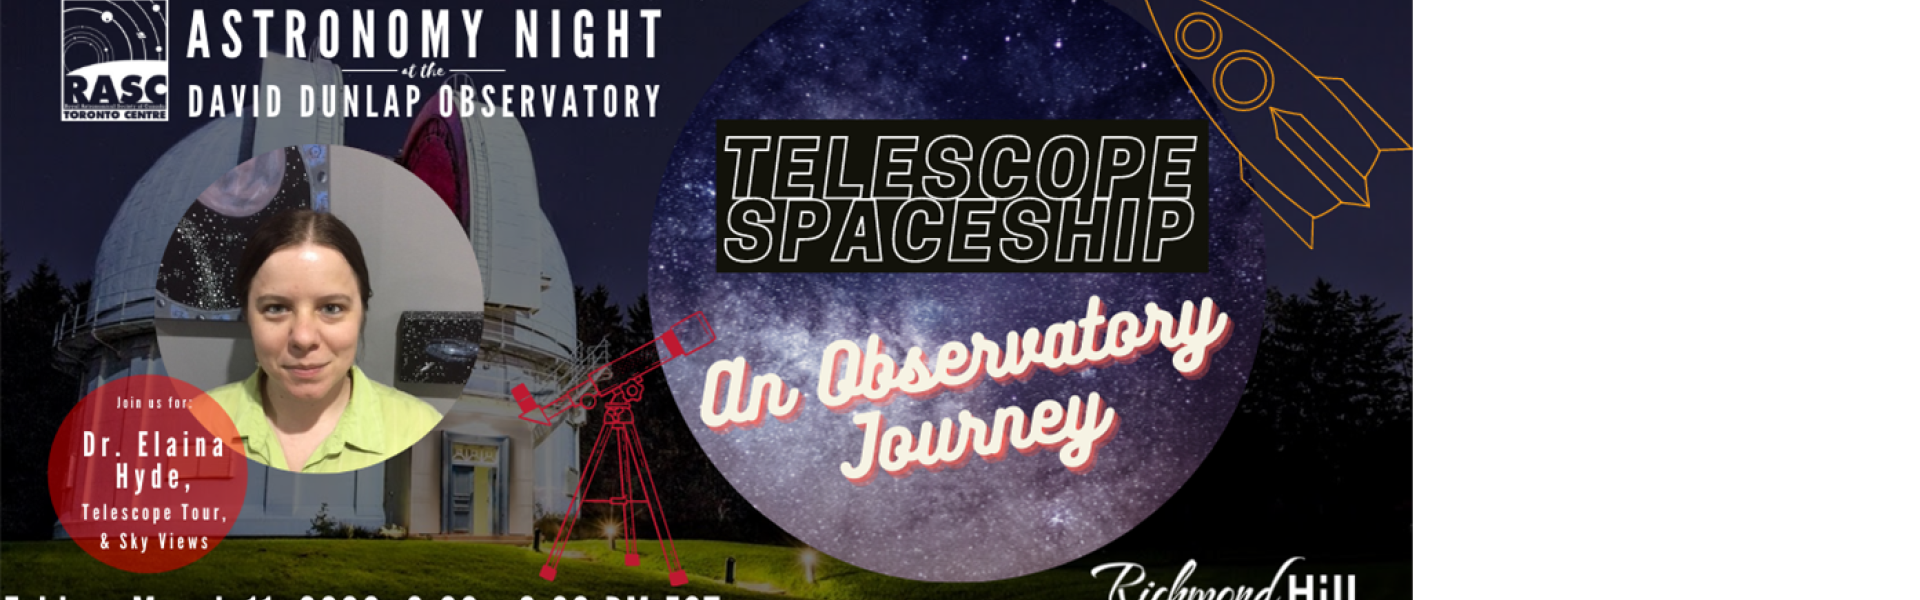 Telescope Spaceship: An Observatory Journey